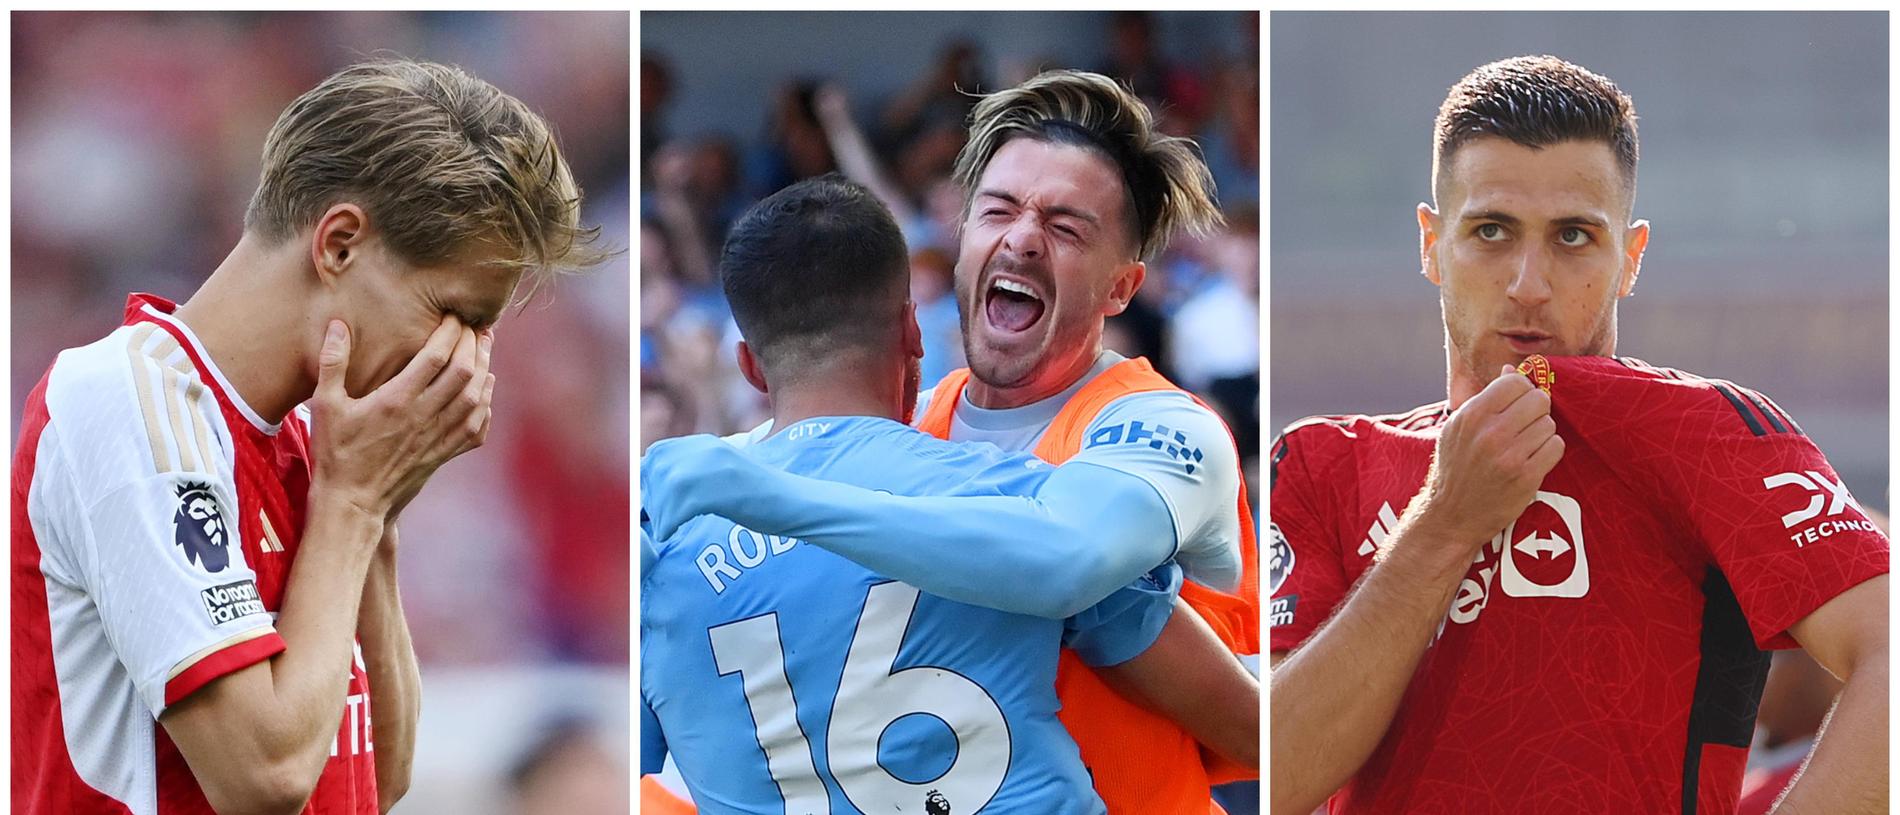 It was agony and ecstasy on the final day of the PRemier League season.